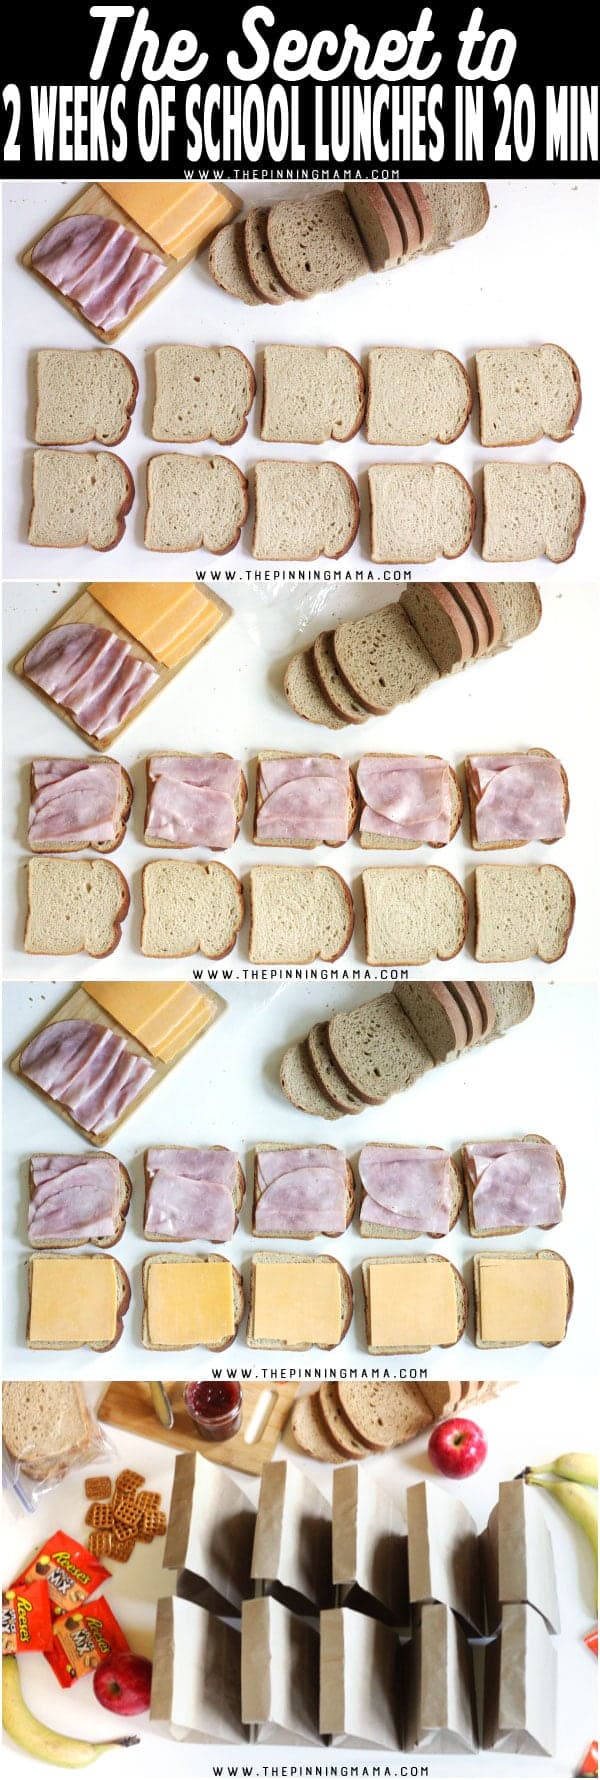 How to make freezer sandwiches - Great for prepping a weeks worth of lunches at a time to save time and stress in the mornings! I can do this for school and work lunches!